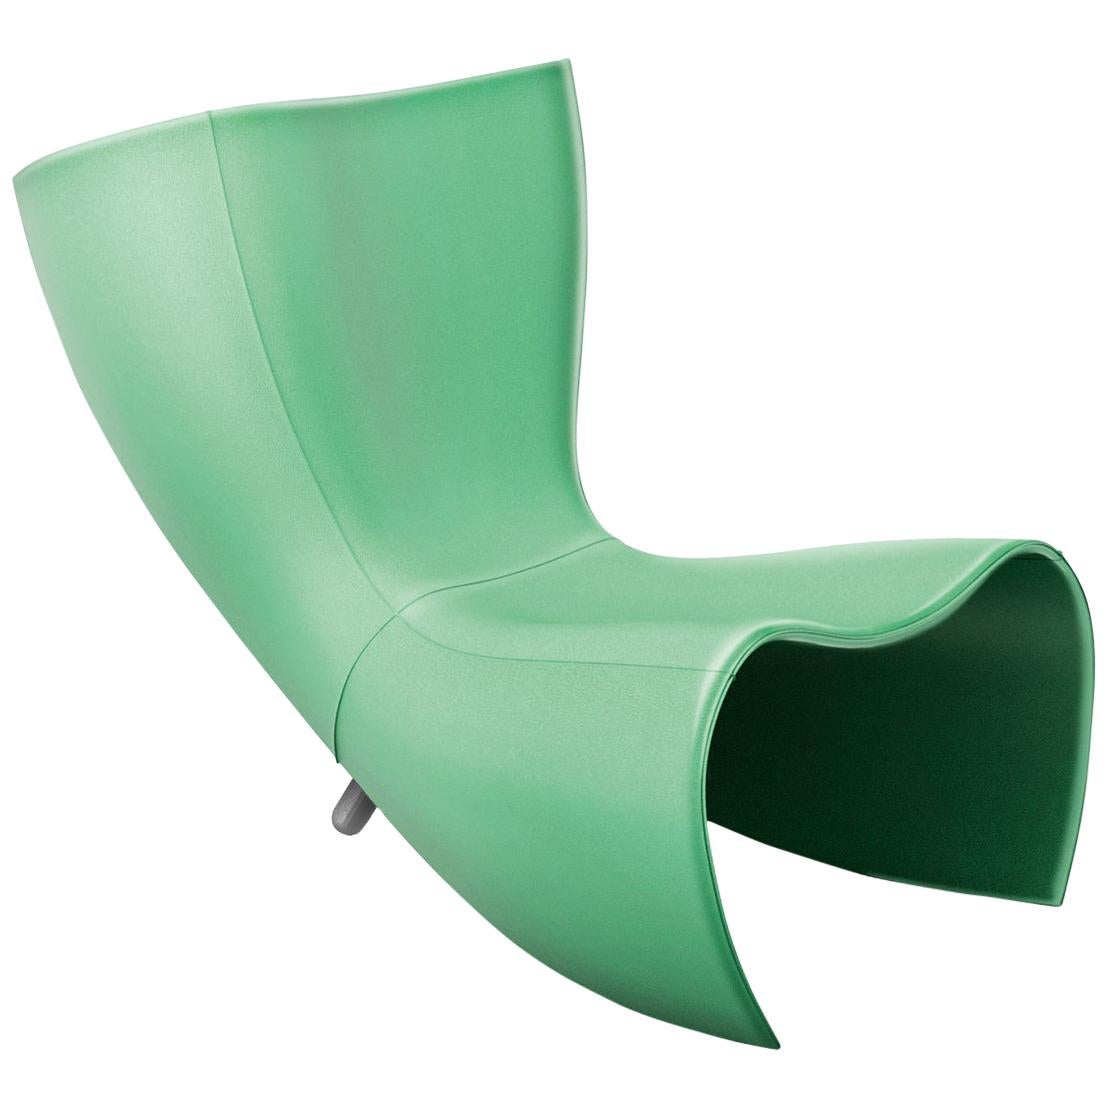 Felt 25th Anniversary Limited Edition Armchair by Marc Newson For Sale